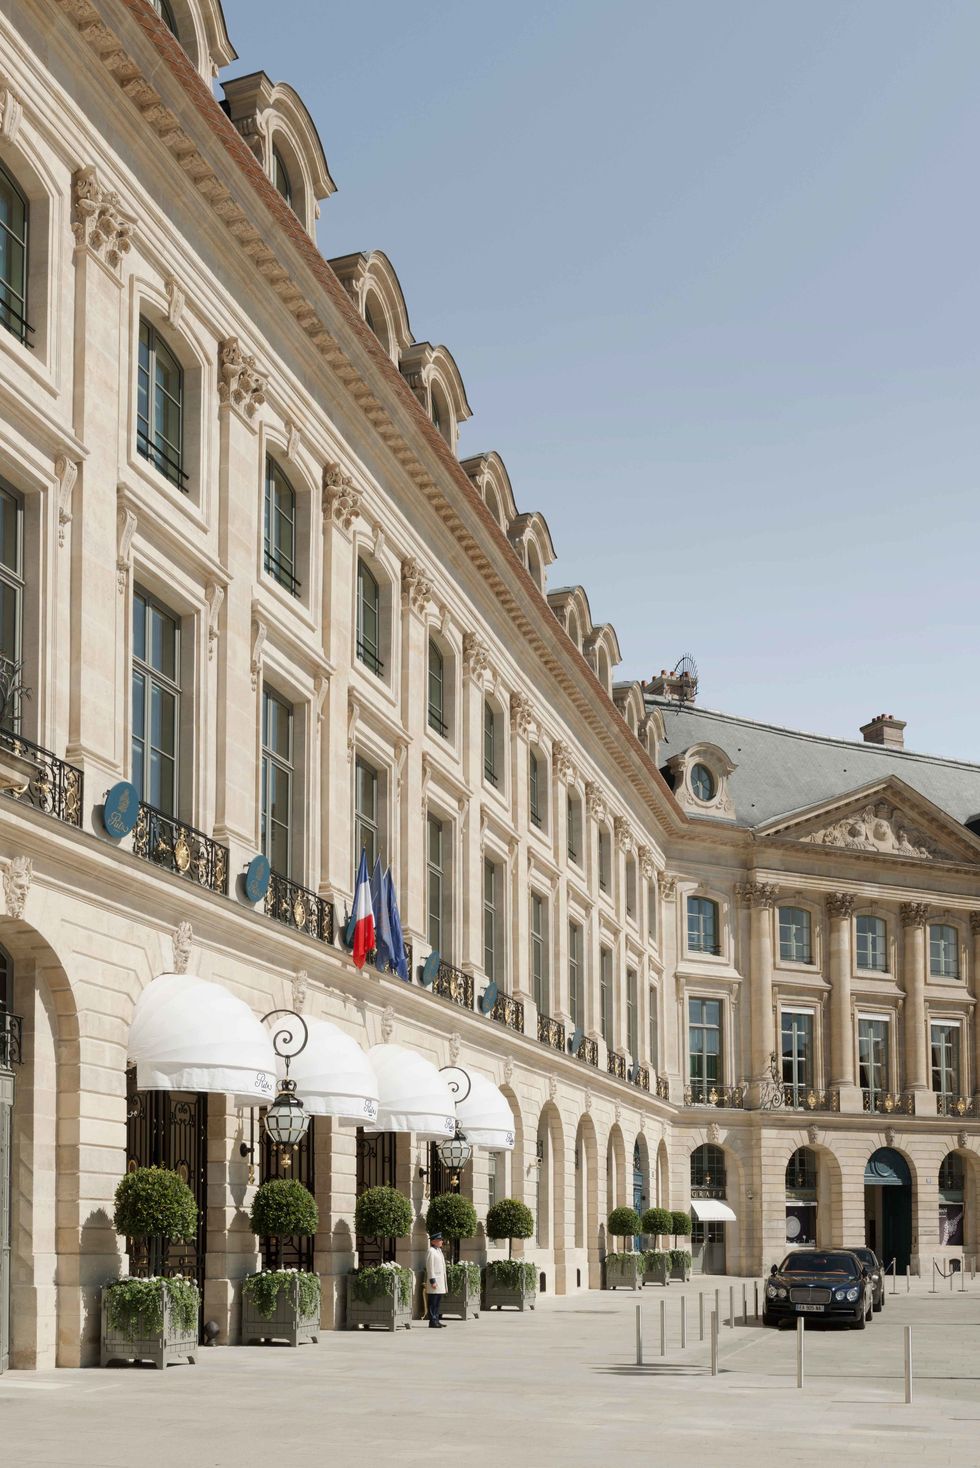 <p>Although it's one of the most famous, luxurious and beloved hotels in the world, it still isn't considered a "Palace." In 2010, the French Ministry of Tourism created the <a href="http://www.townandcountrymag.com/leisure/travel-guide/a9133/palace"><u data-redactor-tag="u">six-star Palace designation for extraordinary hotels</u></a> that demonstrate — among many criteria — exceptional beauty, history and gastronomic excellence. Currently, there are 23 Palaces in France and 10 in Paris — but the honor has so far eluded the Ritz Paris. After its recent $450 million face lift, perhaps the beautiful hotel will finally receive the recognition.<span class="redactor-invisible-space" data-verified="redactor" data-redactor-tag="span" data-redactor-class="redactor-invisible-space"></span></p>